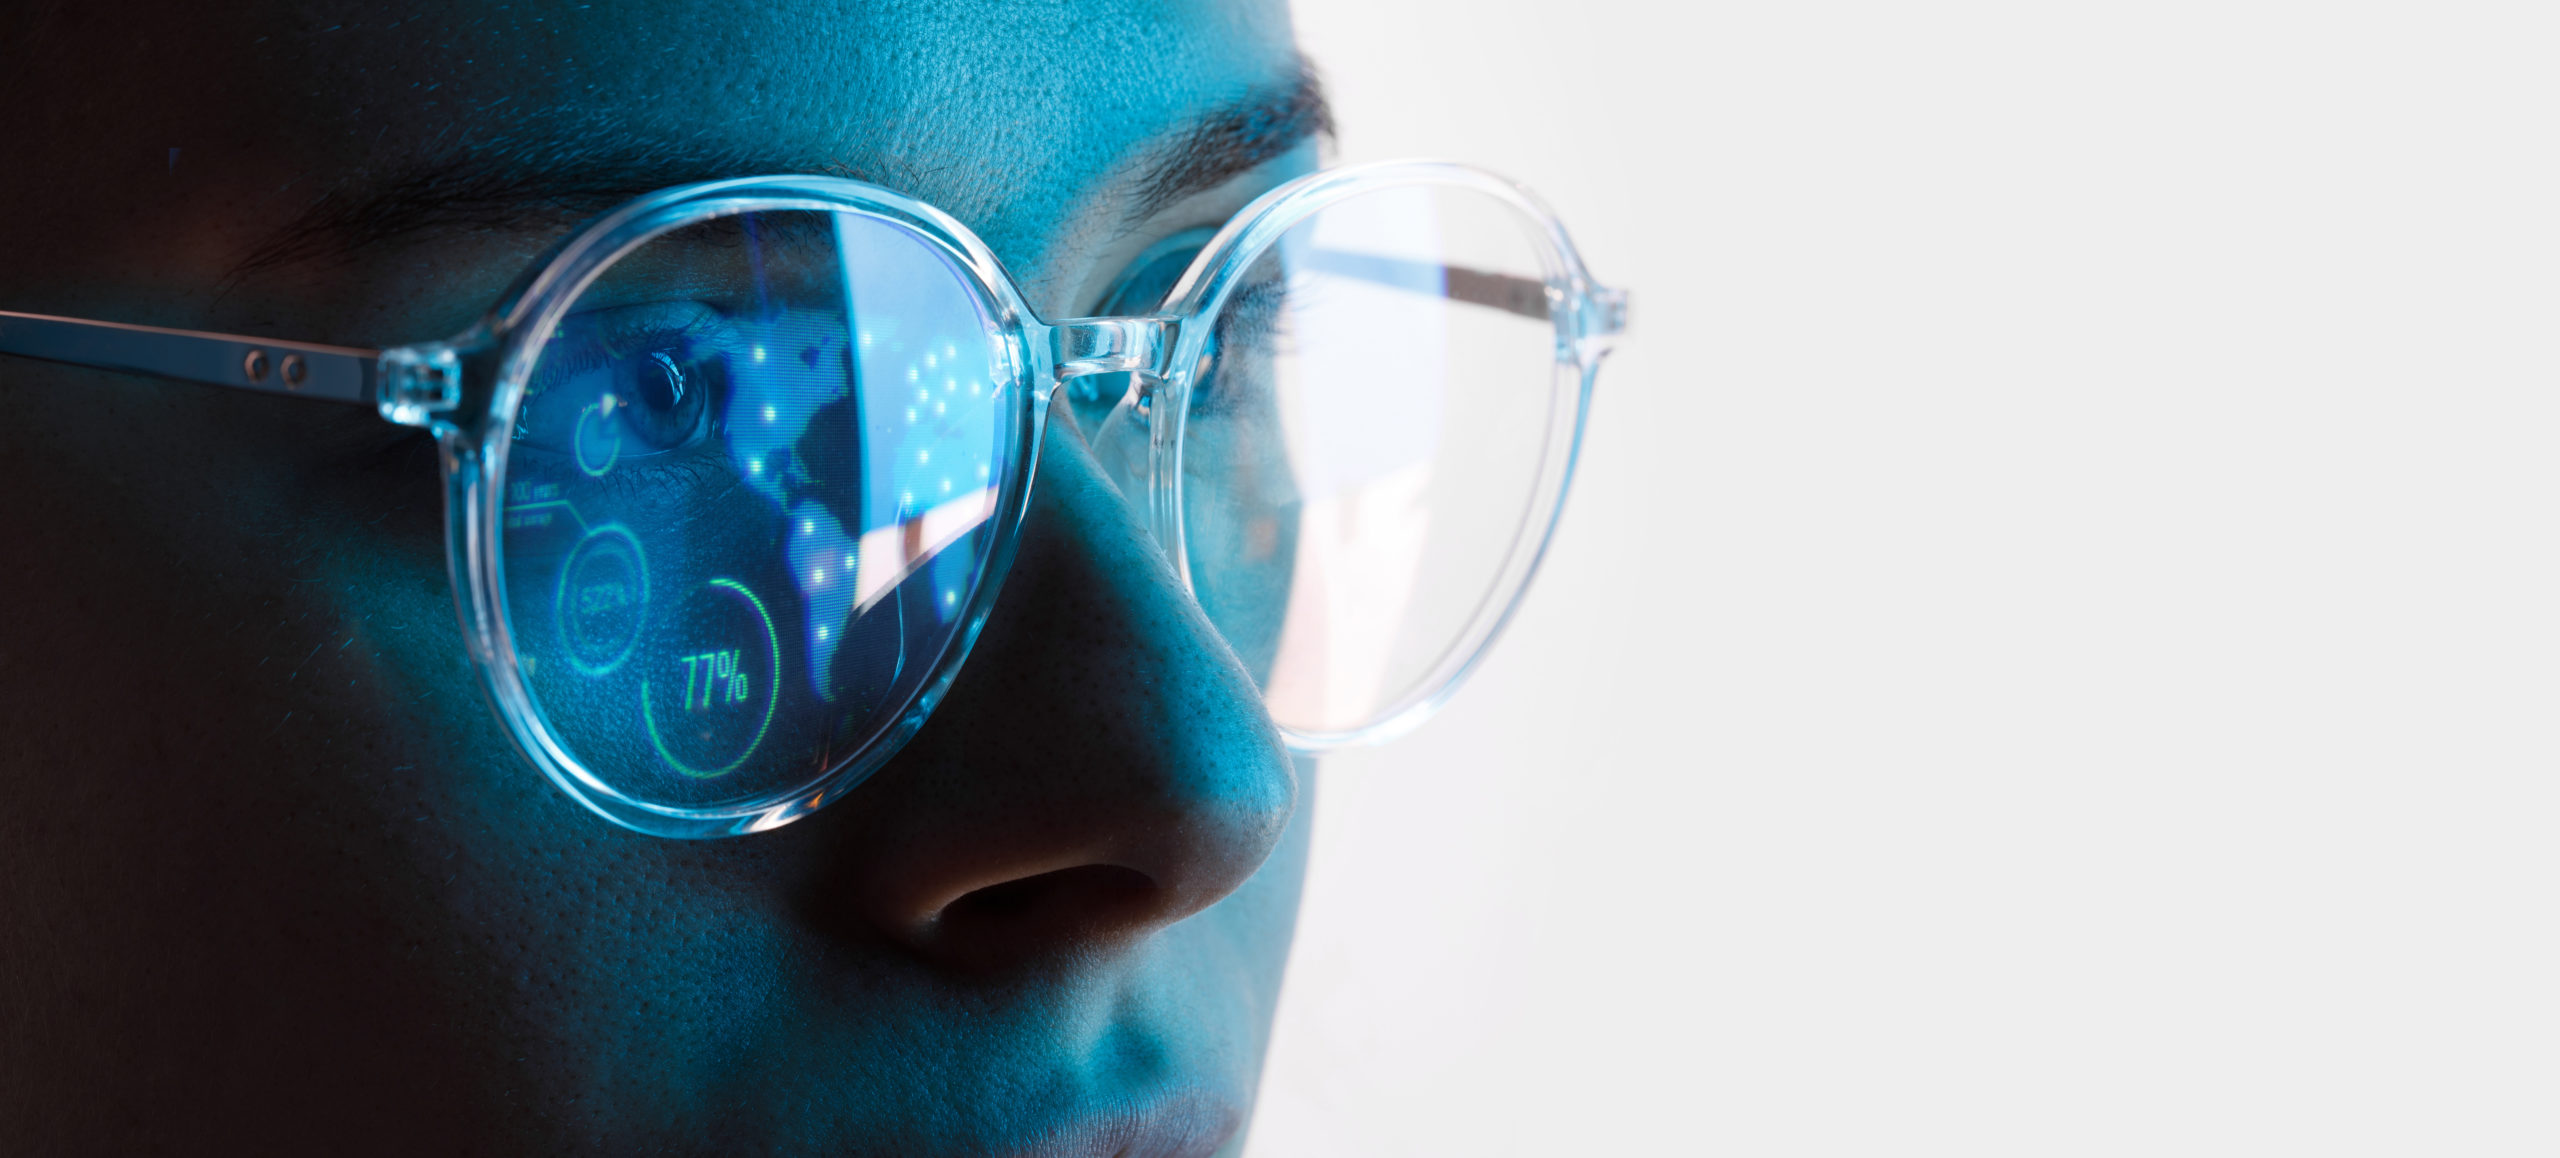 A close up of a person wearing AR glasses that has information displayed in one of the lenses.